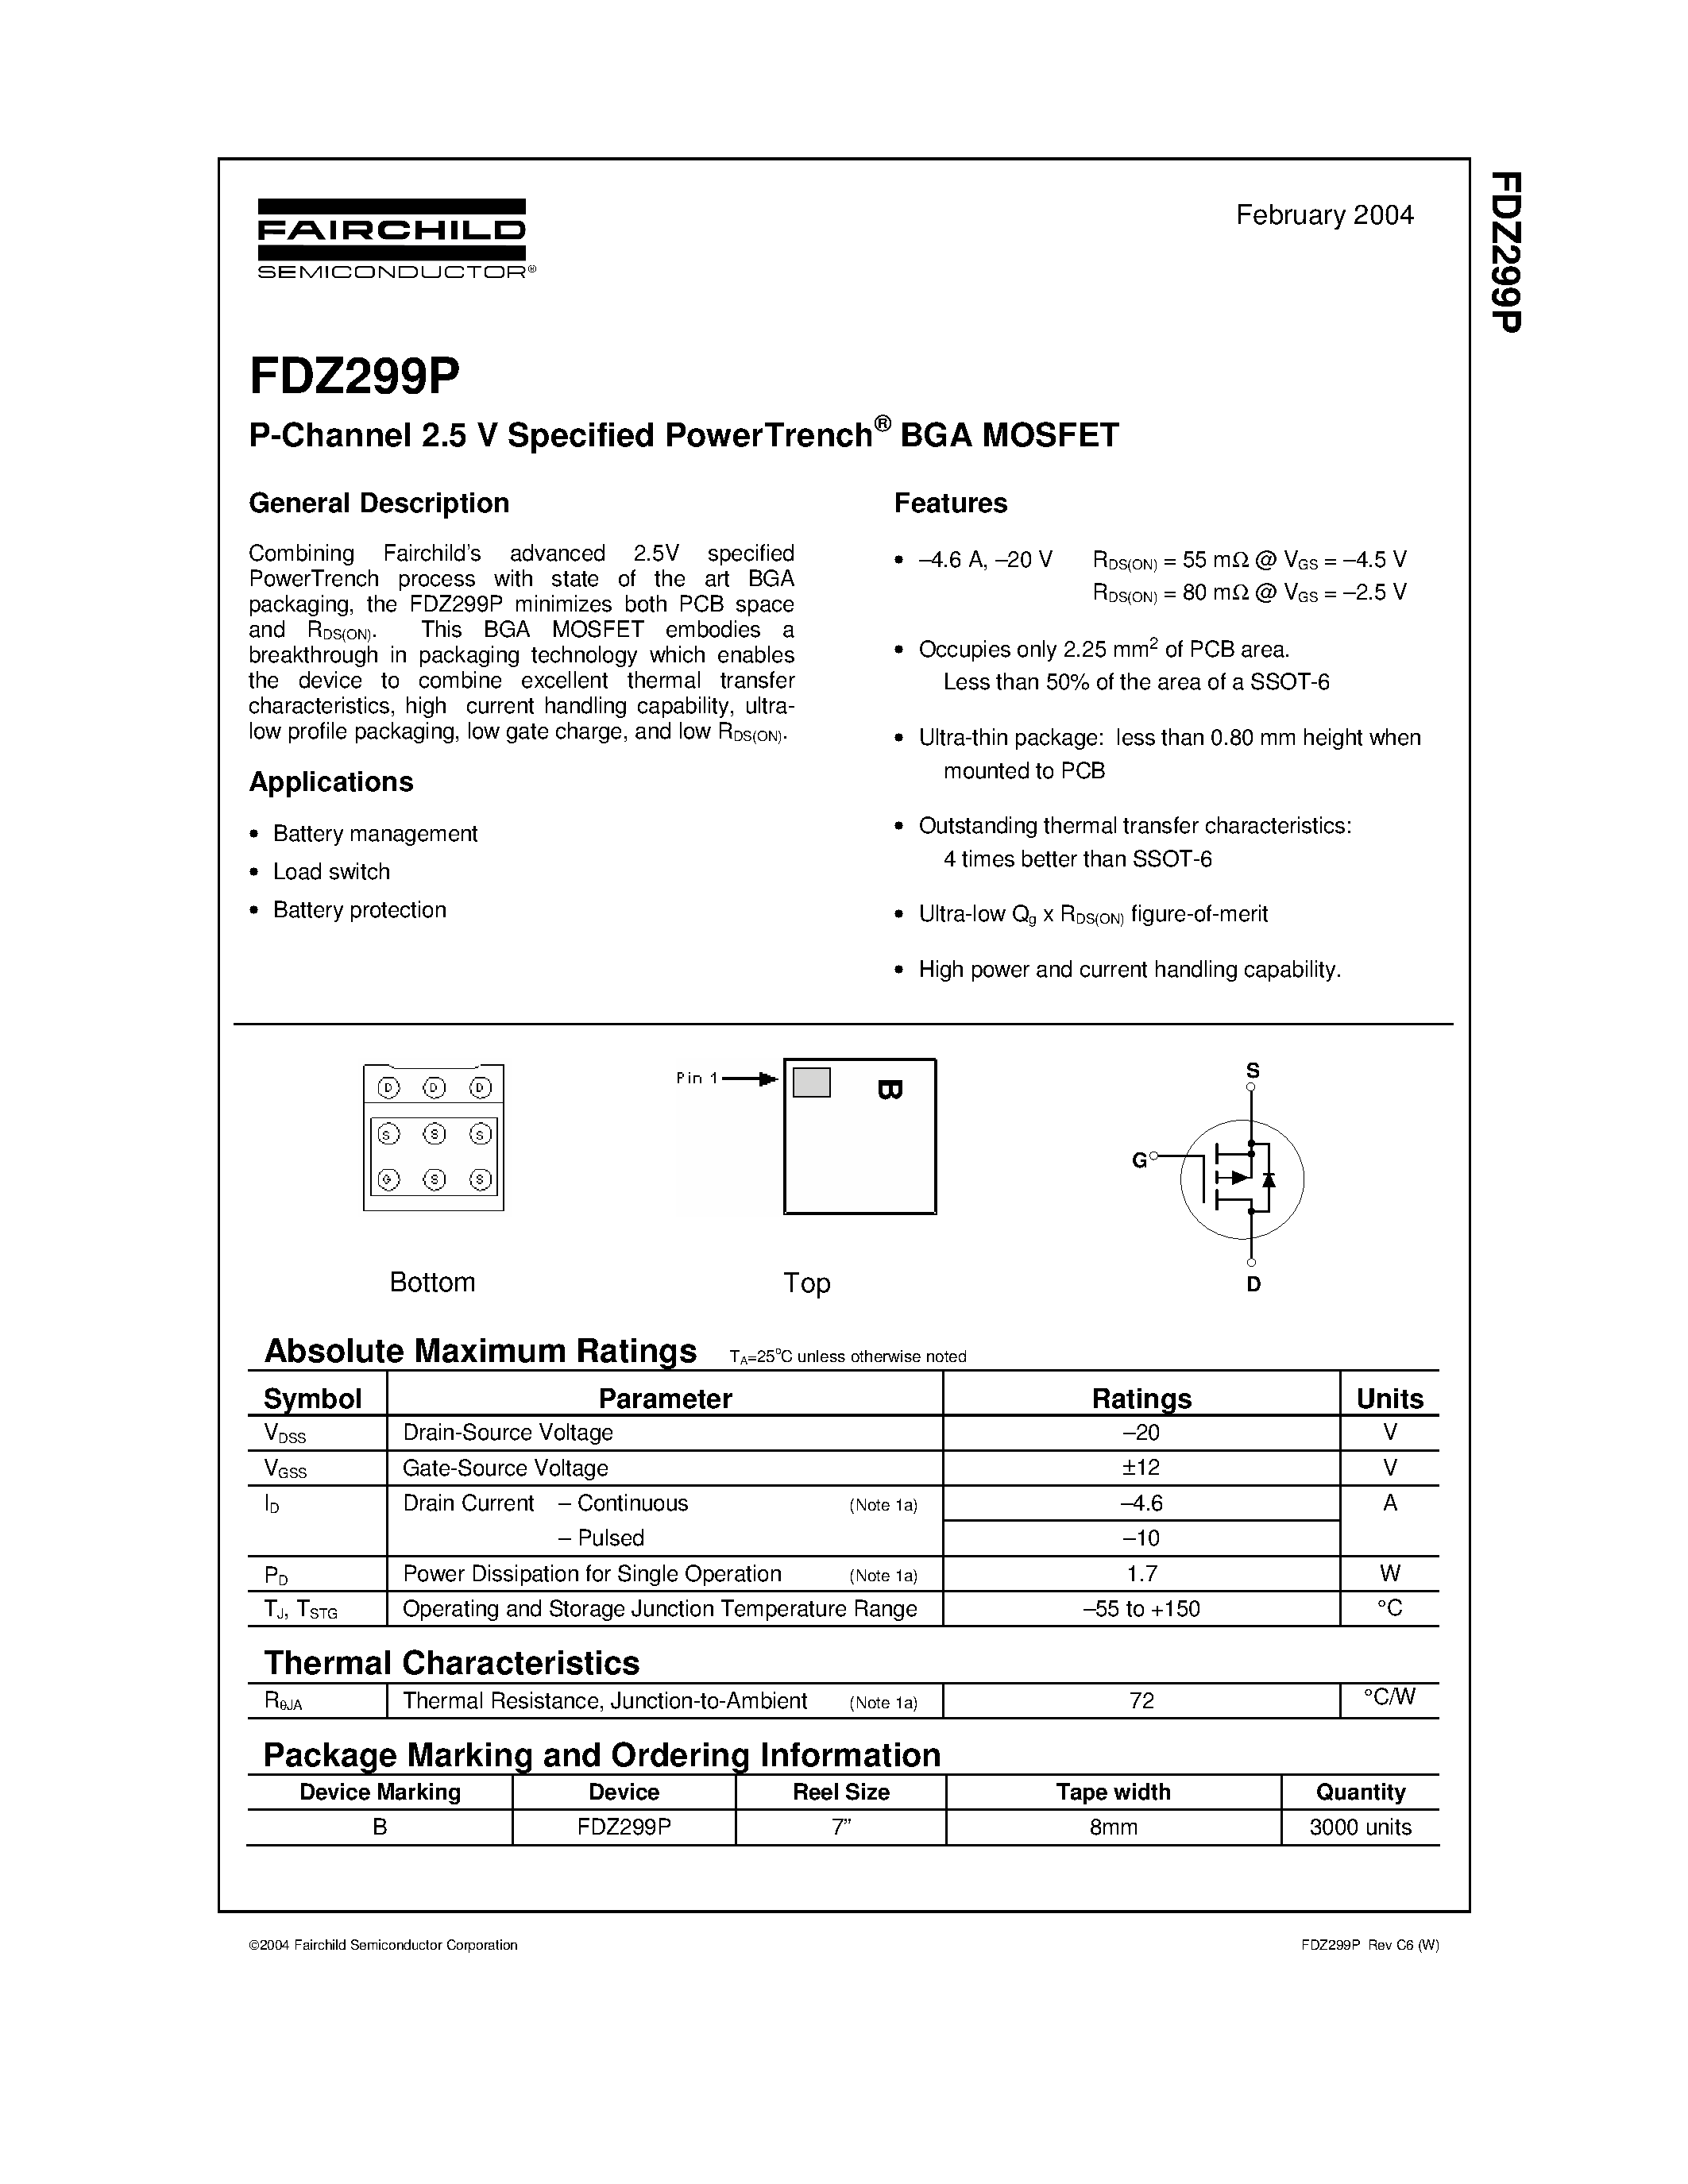 Даташит FDZ299P - P-Channel 2.5 V Specified PowerTrench BGA MOSFET страница 1